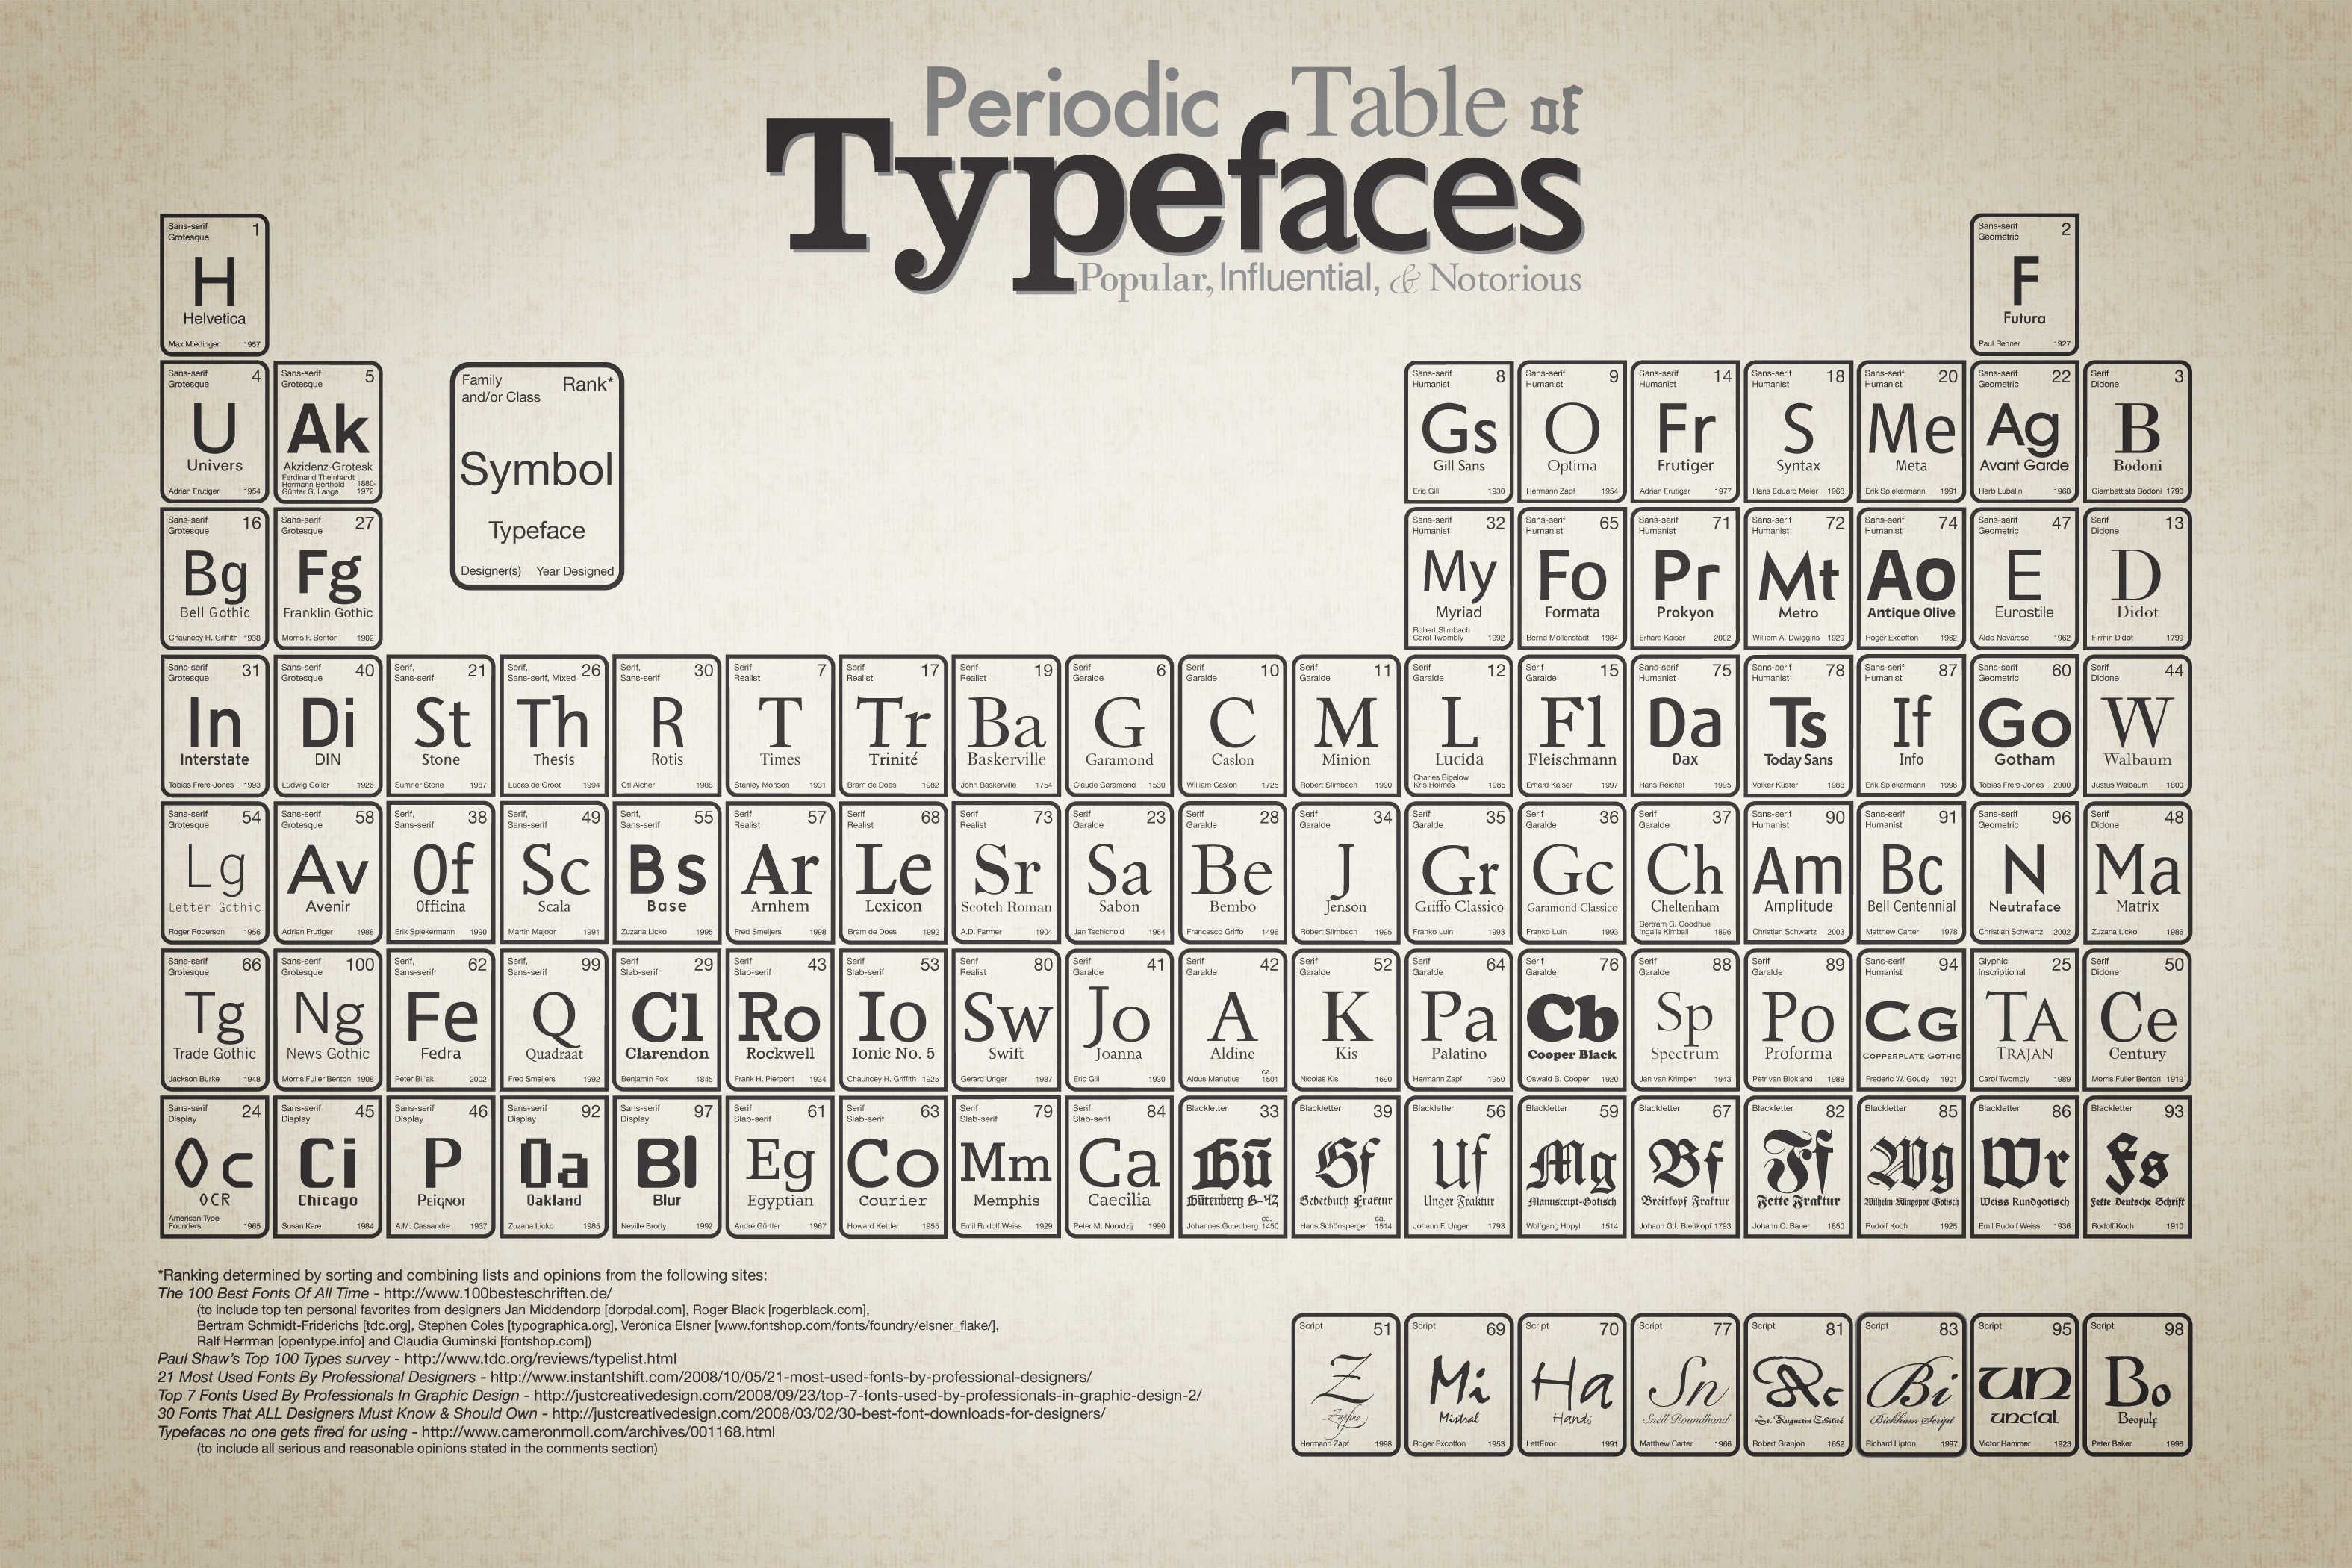 Typeface Periodic Table. The Floating Frog